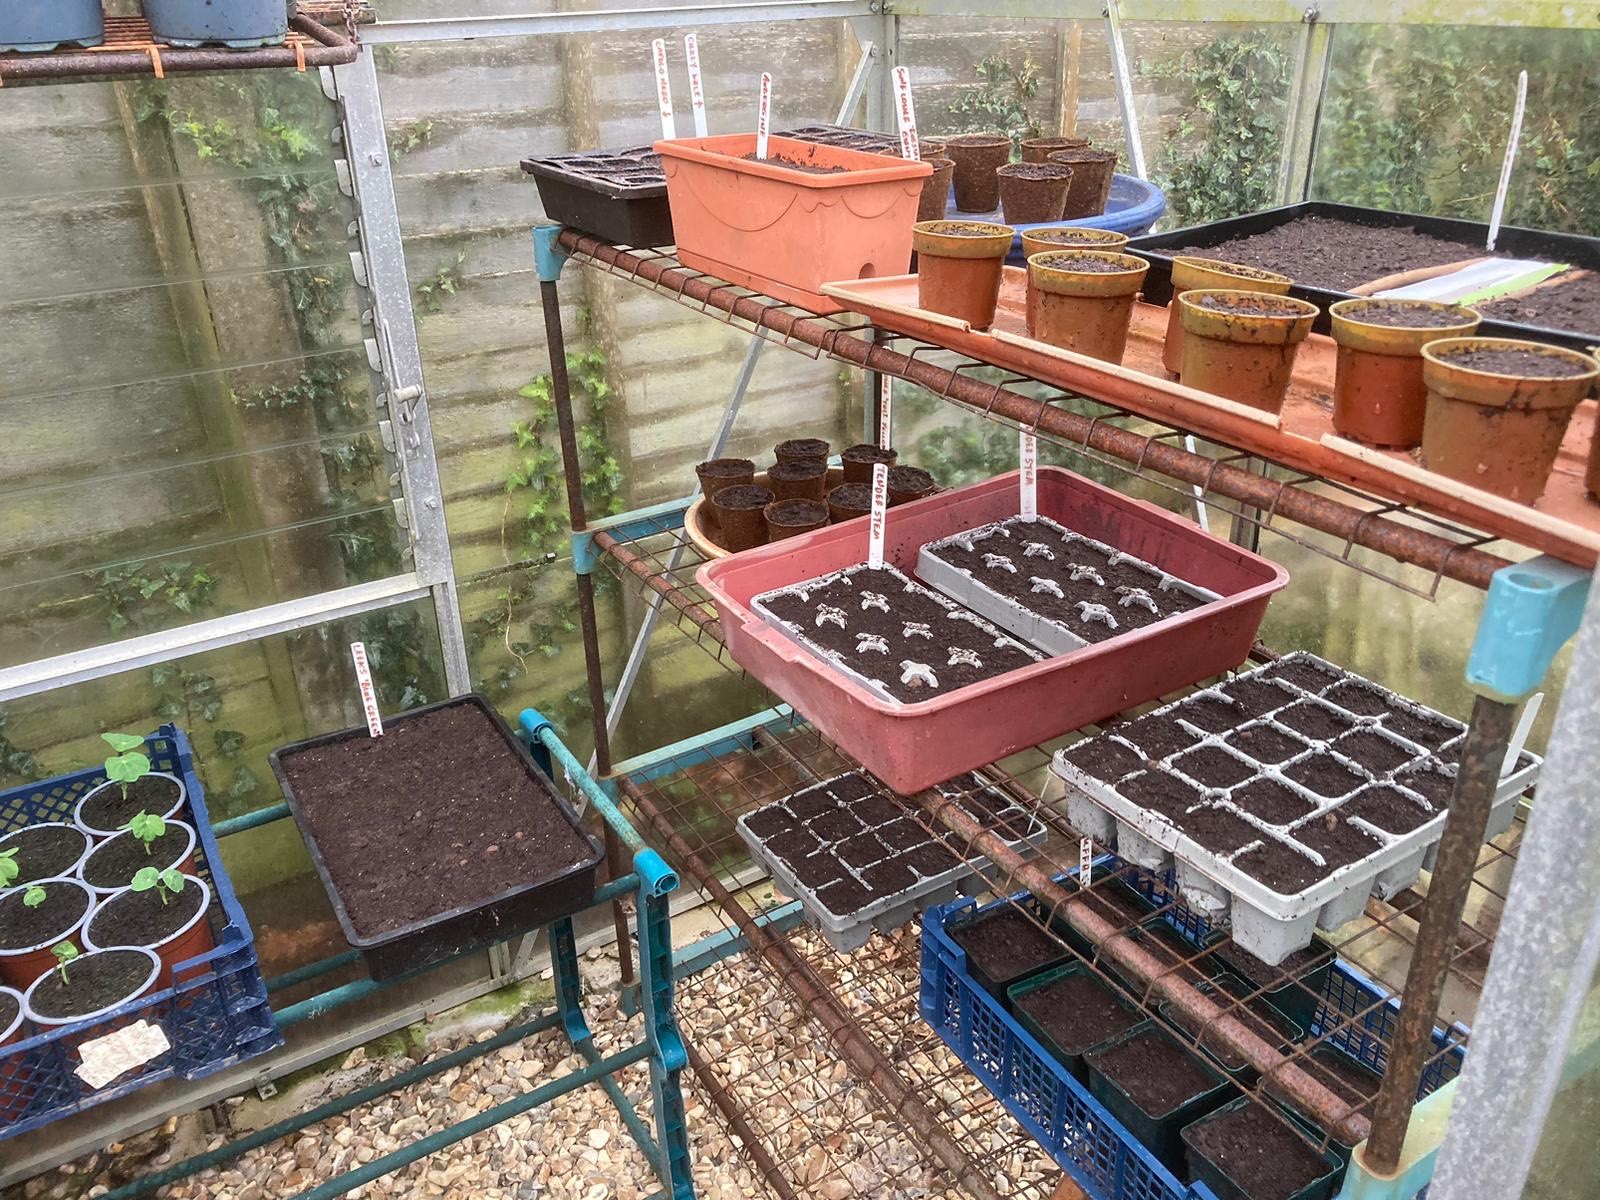 From seed to service – the Potager Garden diary